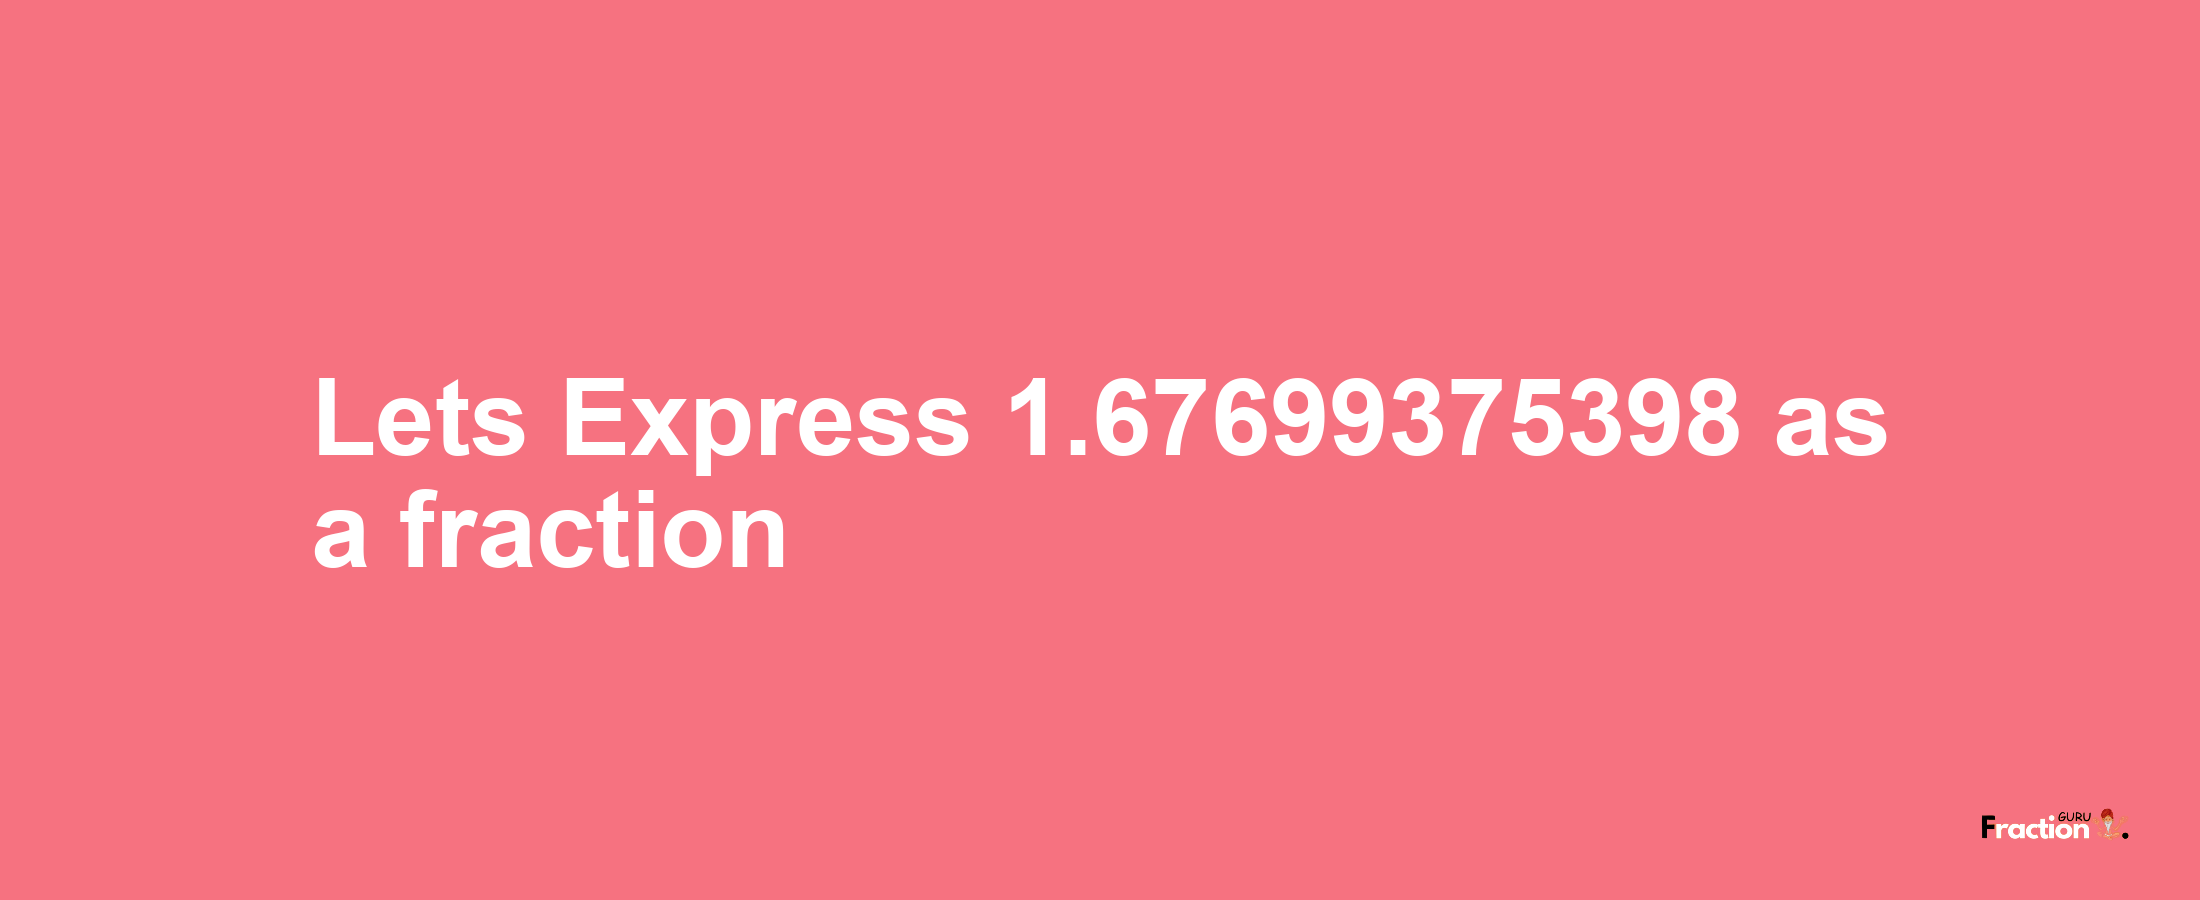 Lets Express 1.67699375398 as afraction